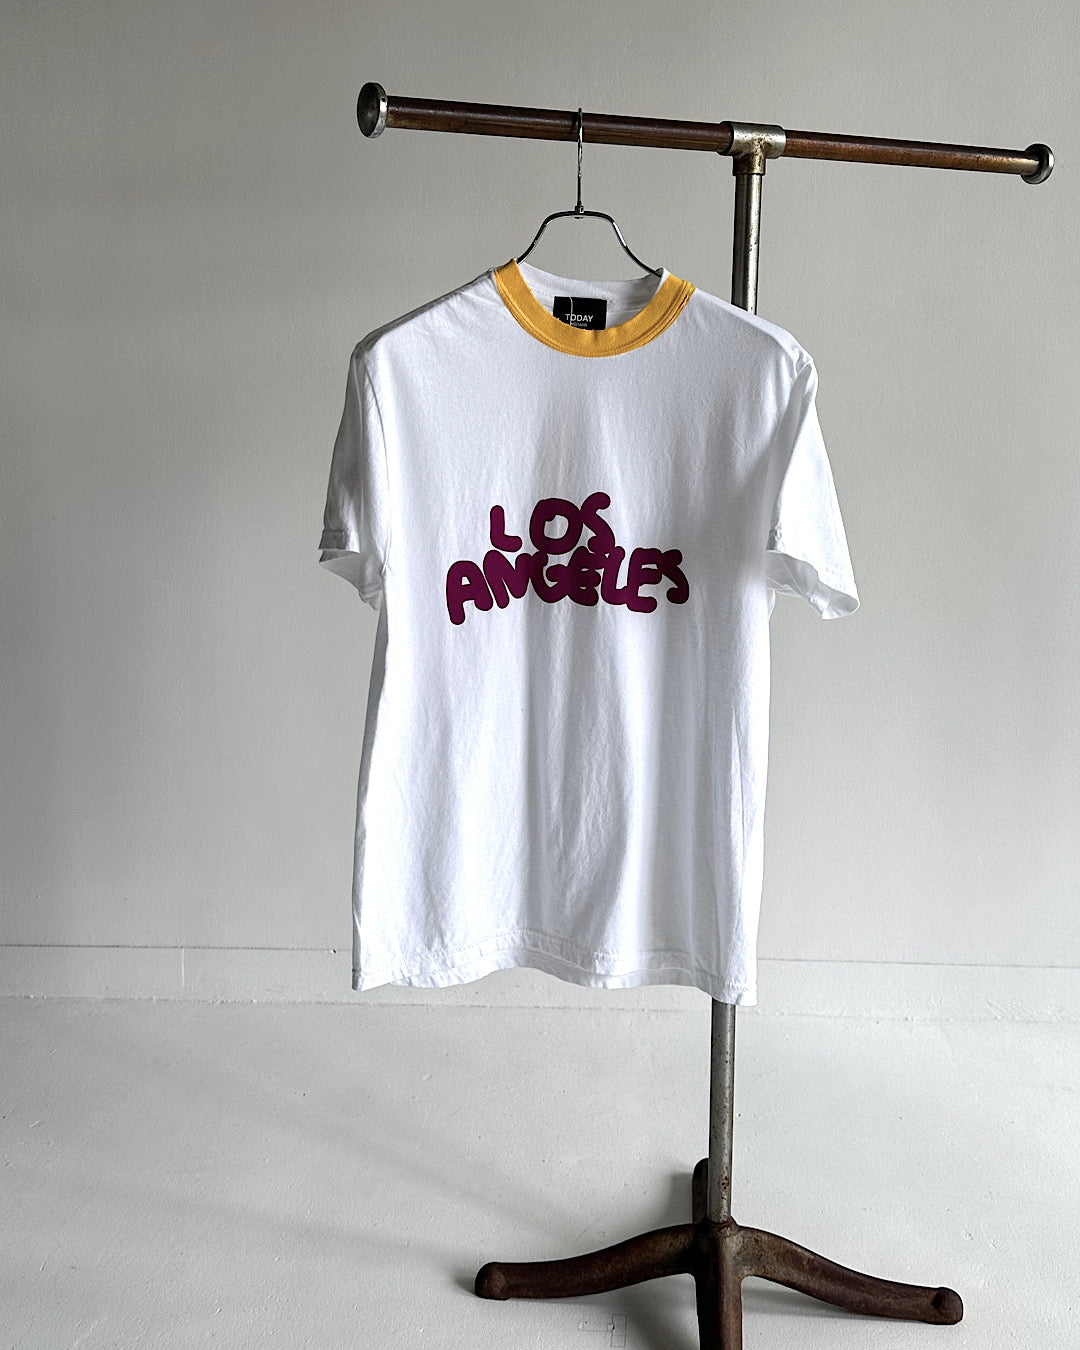 TODAY edition / Printed Ringer "LOS ANGELS" SS Tee - WHITE